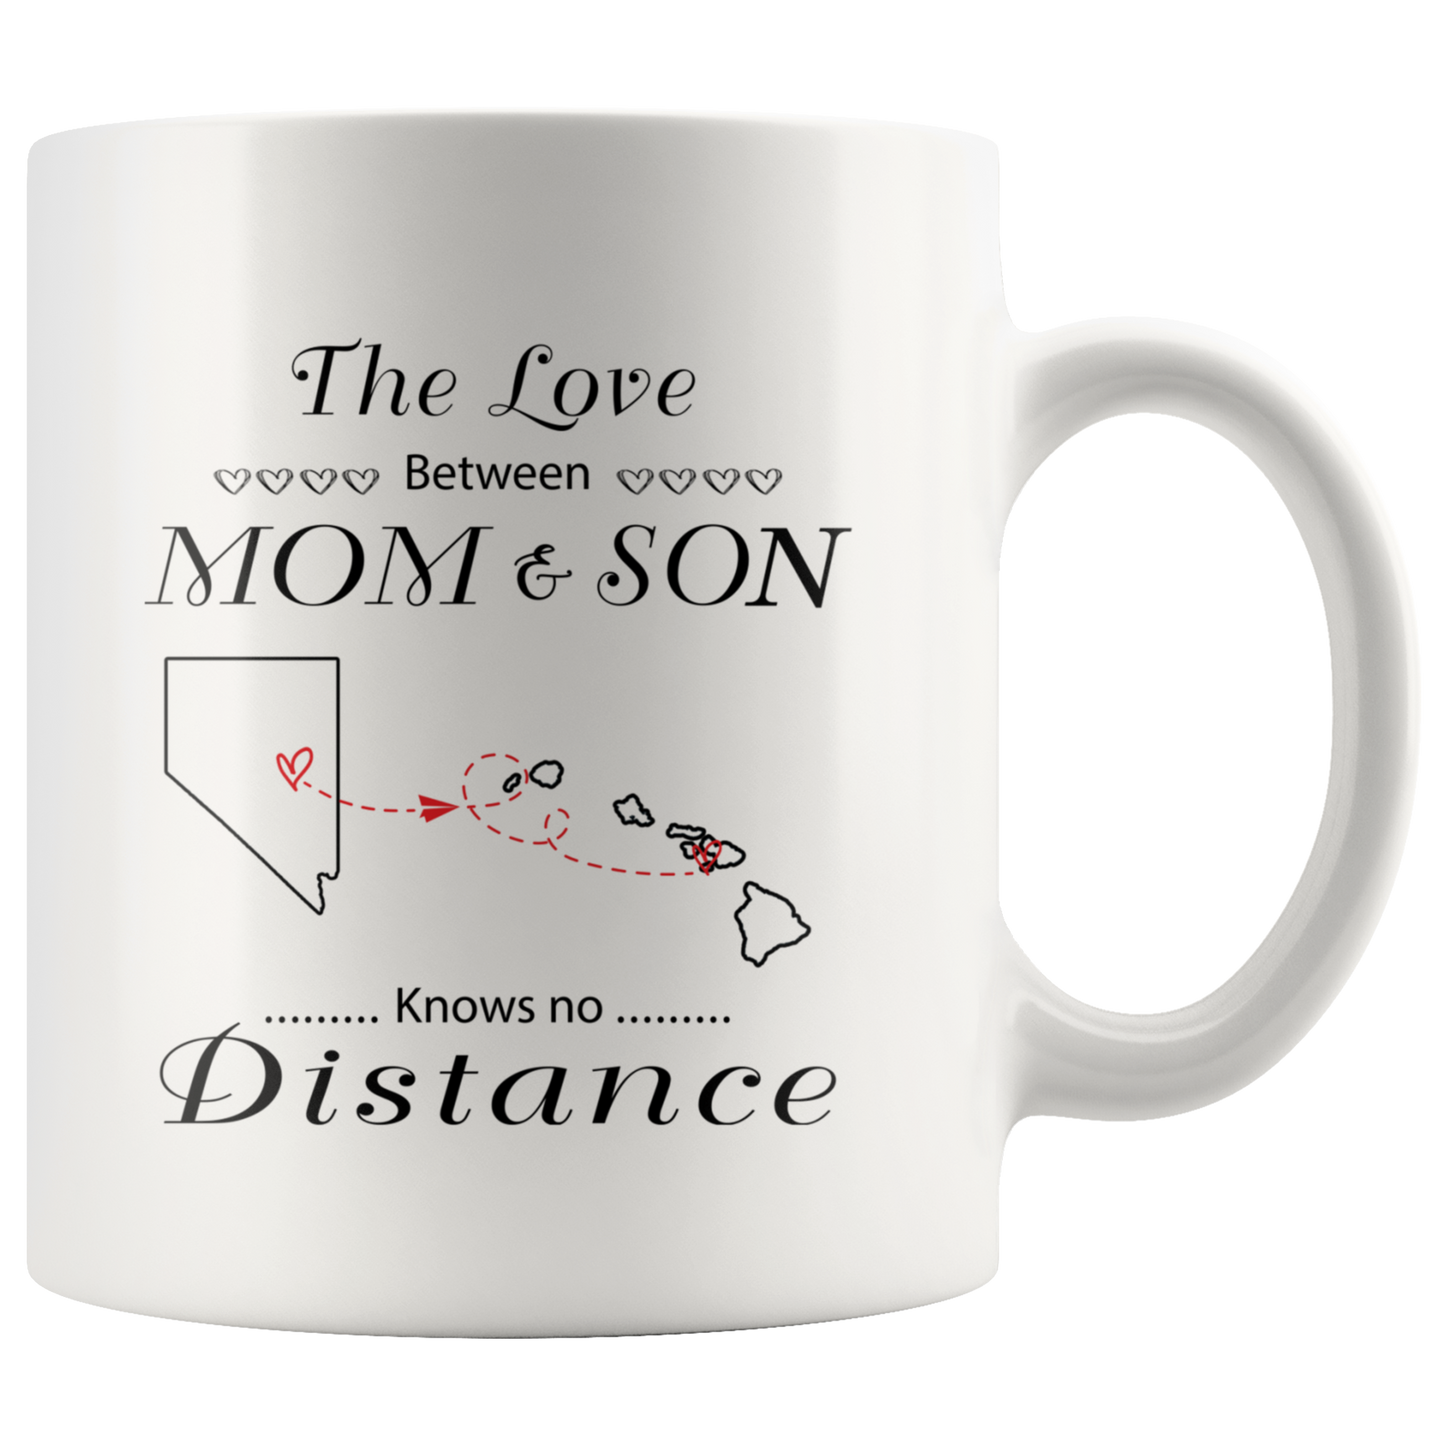 M-20616058-sp-24298 - [ Nevada | Hawaii ]The Love Between Mother Mom And Son Knows No Distance Nevada